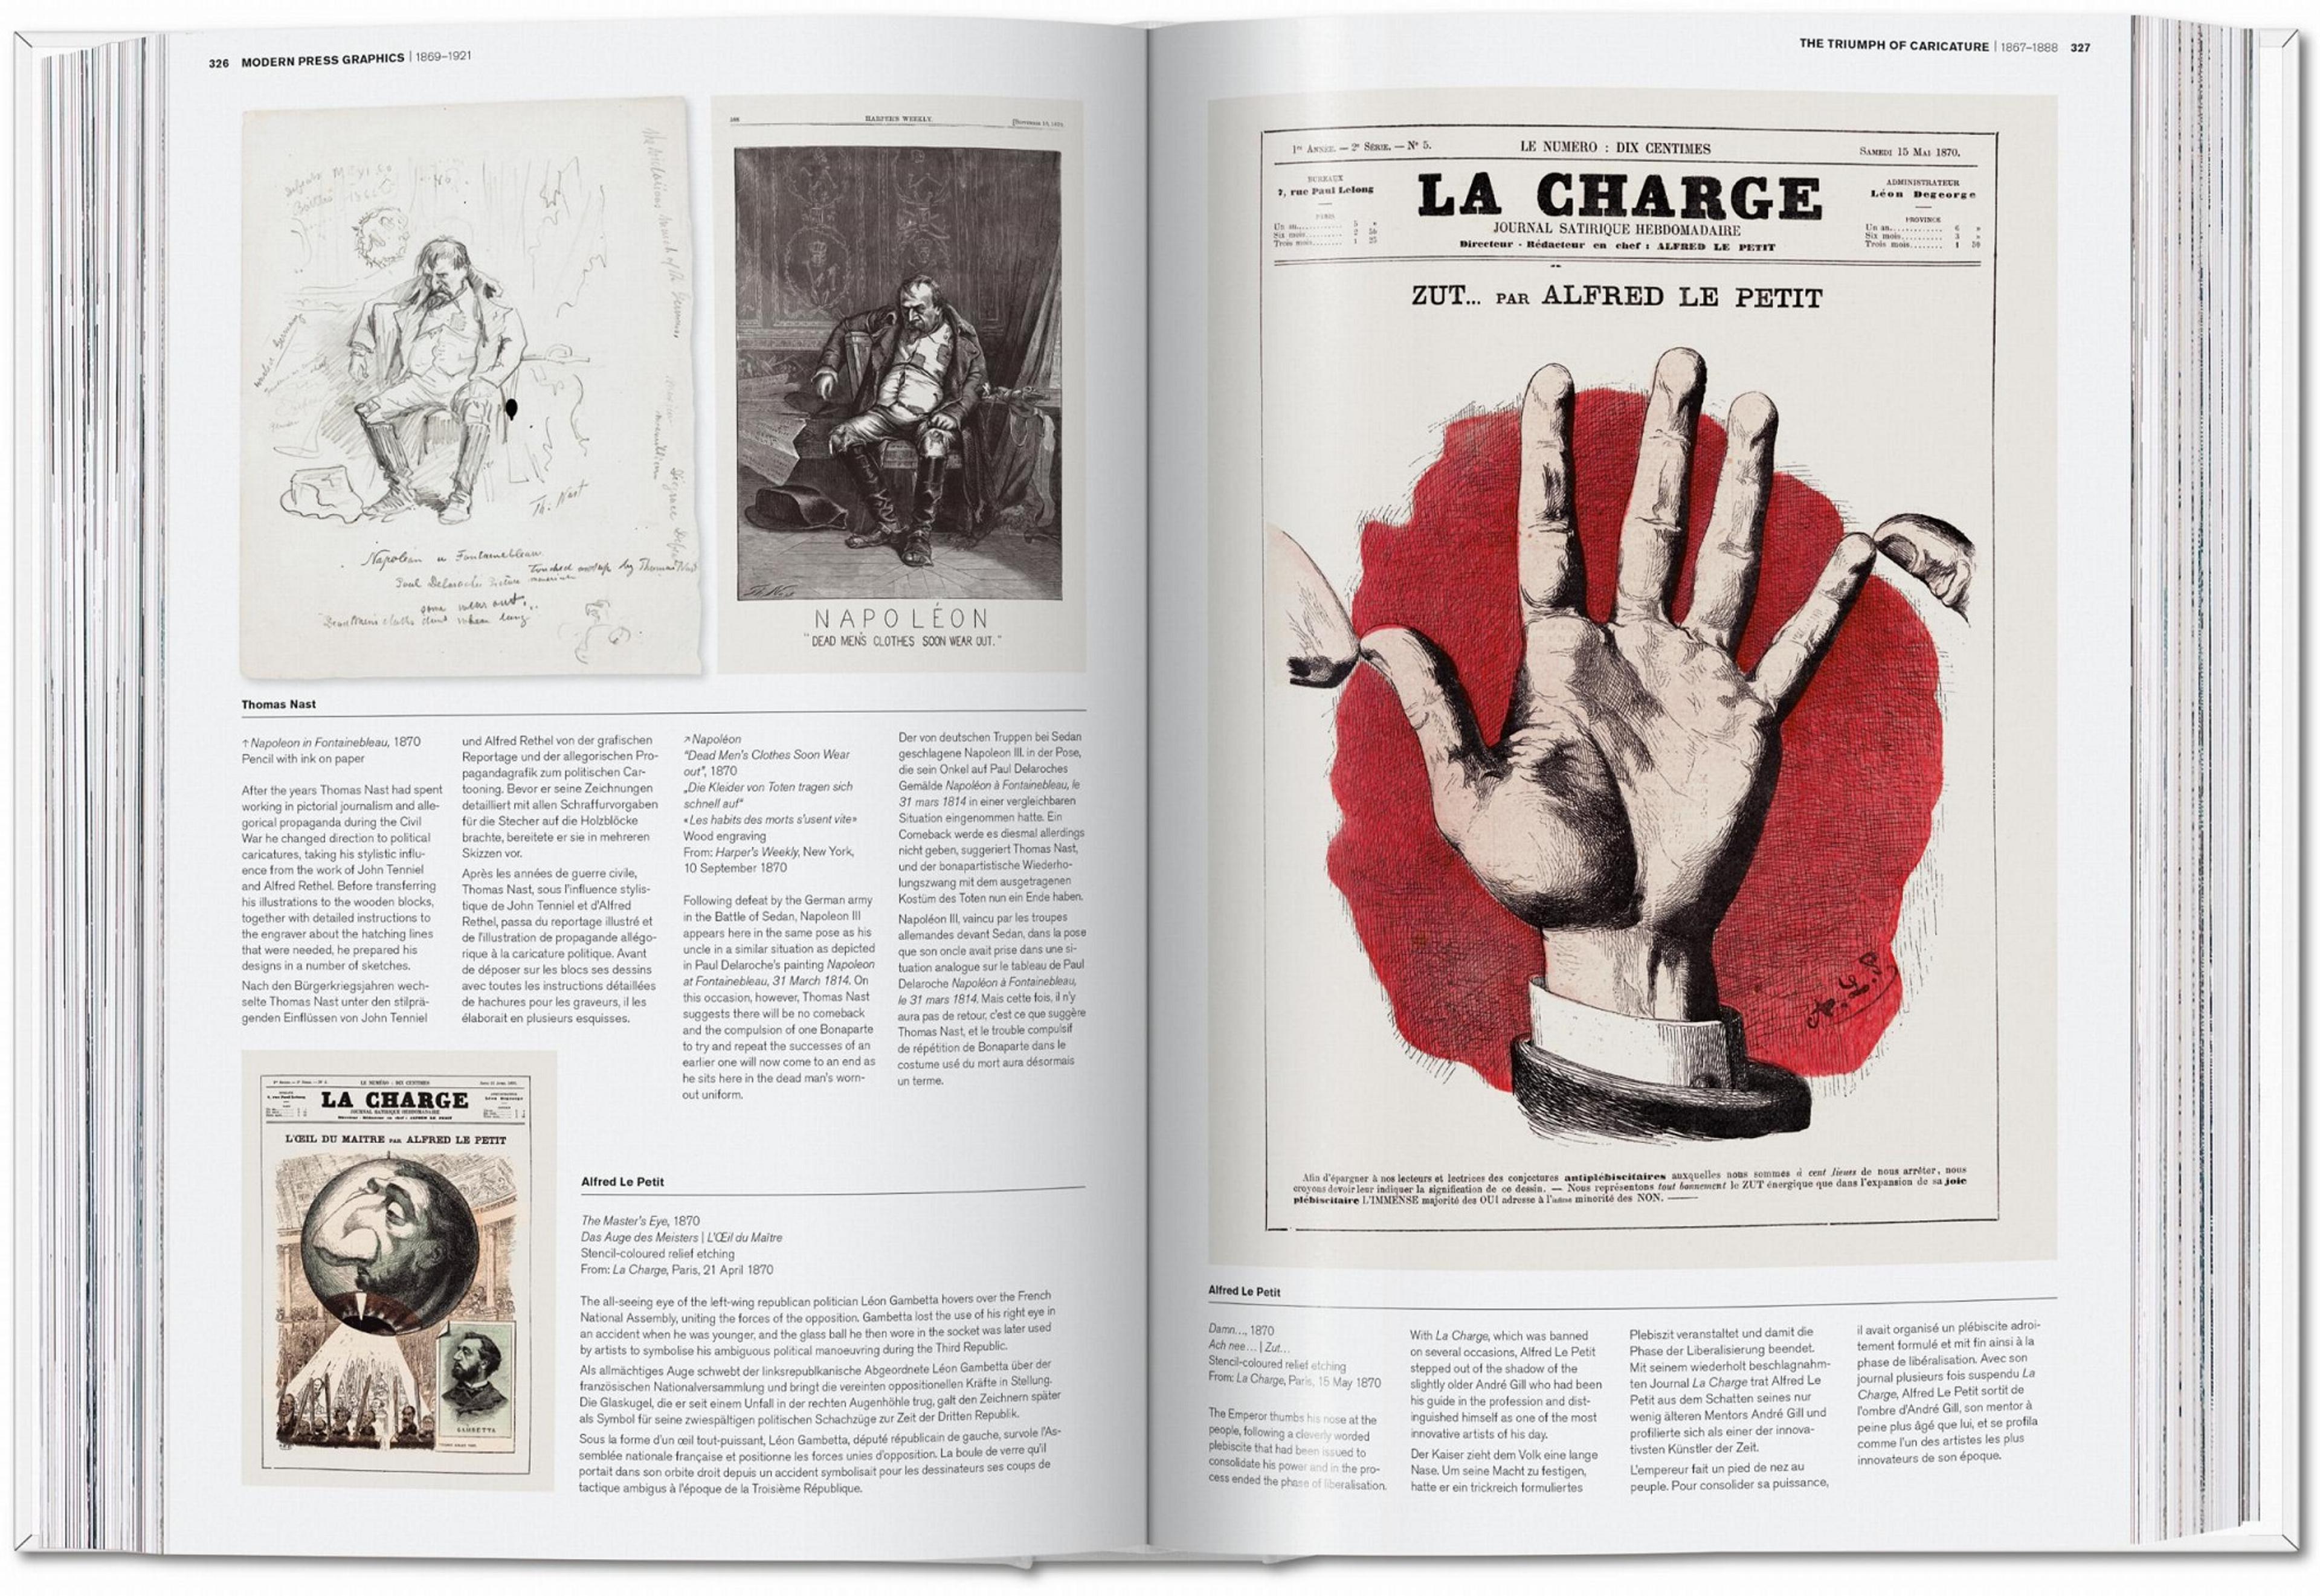 Photograph of an open book with images of two magazine covers and a sketch of Napoleon with a printed version of the same image